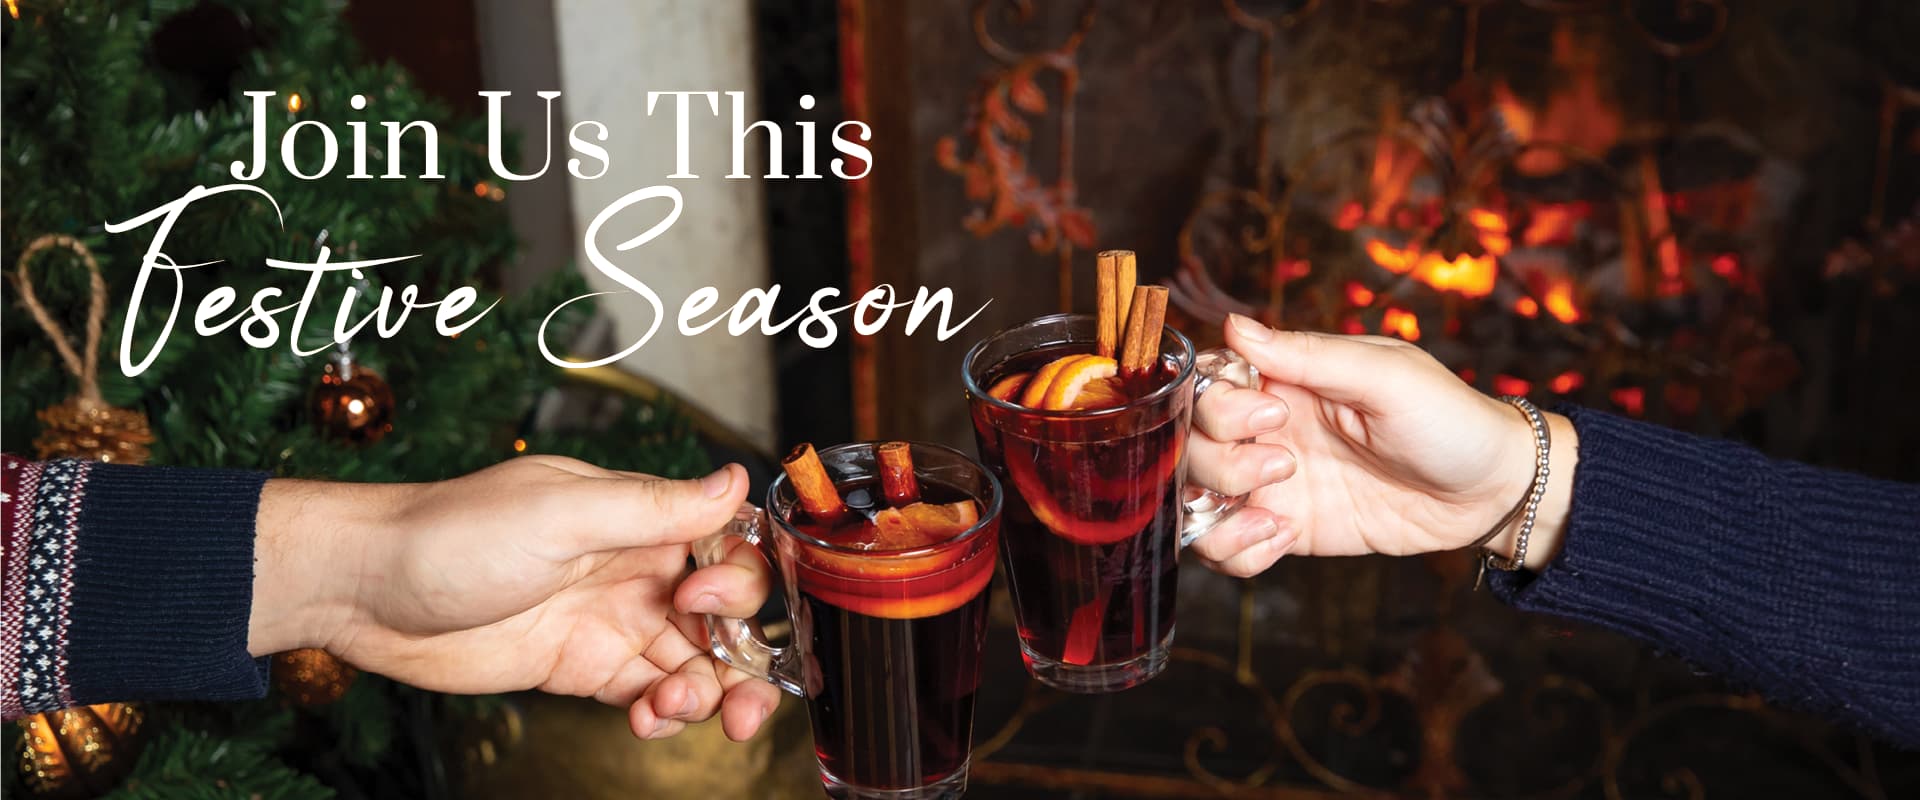 join us this festive season at The Bull | Mulled Wine